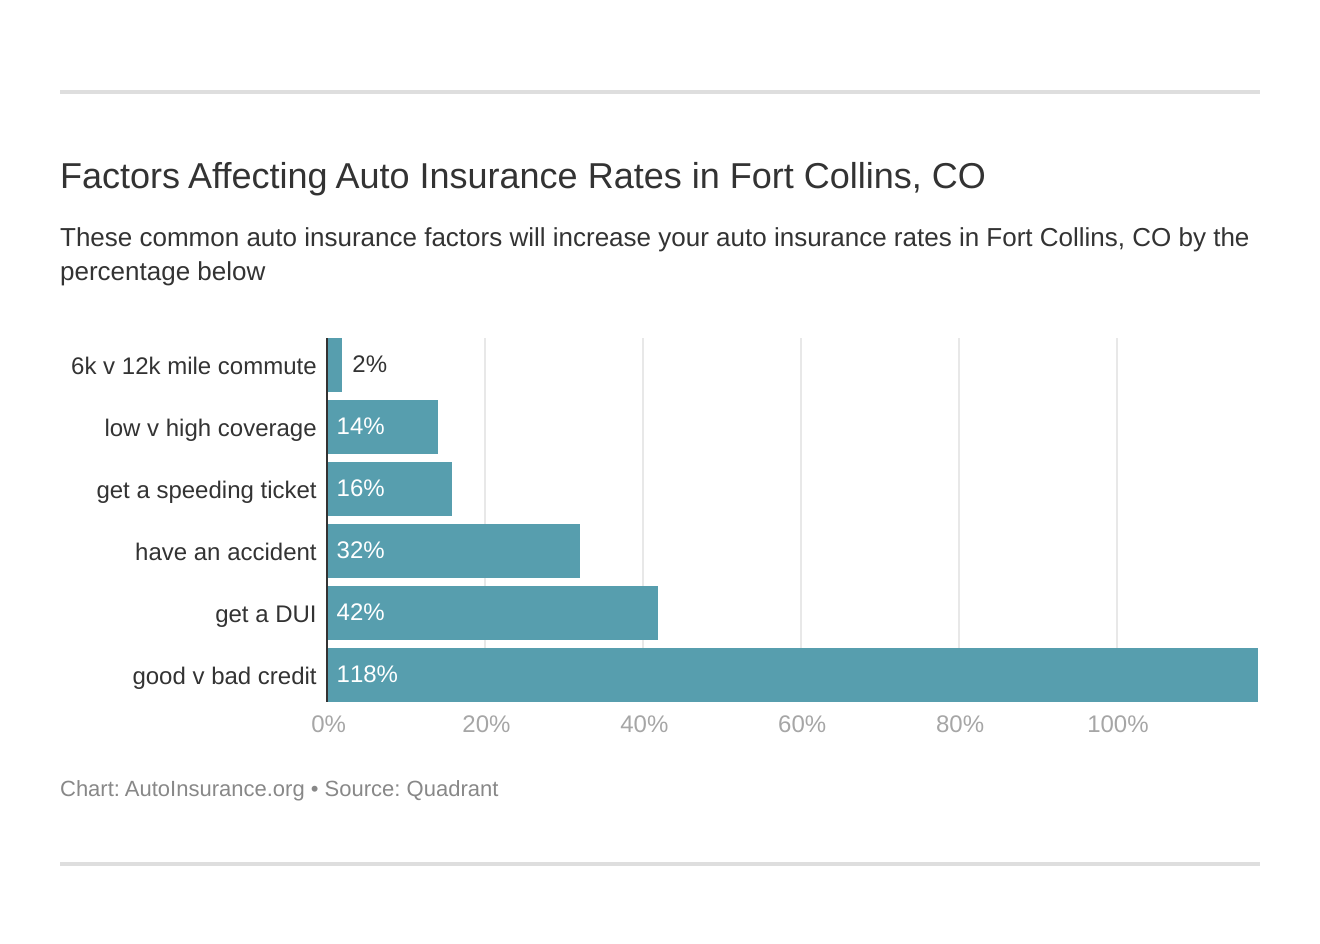 Factors Affecting Auto Insurance Rates in Fort Collins, CO